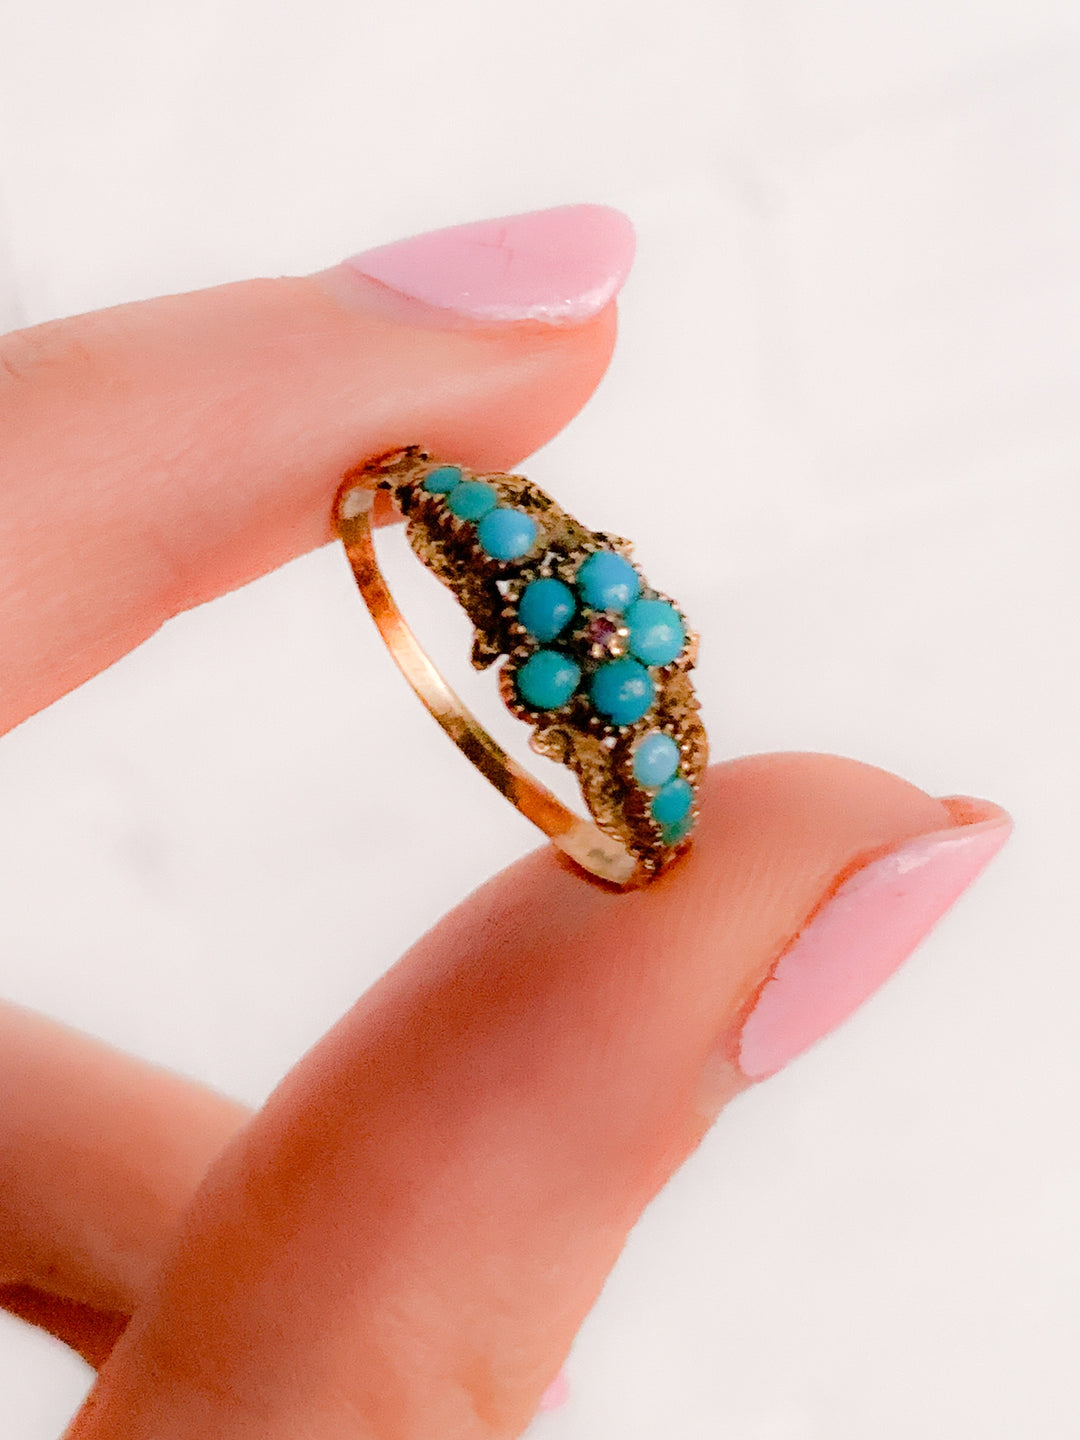 15k Outstanding Victorian Flower Ring of Turquoise and Garnet